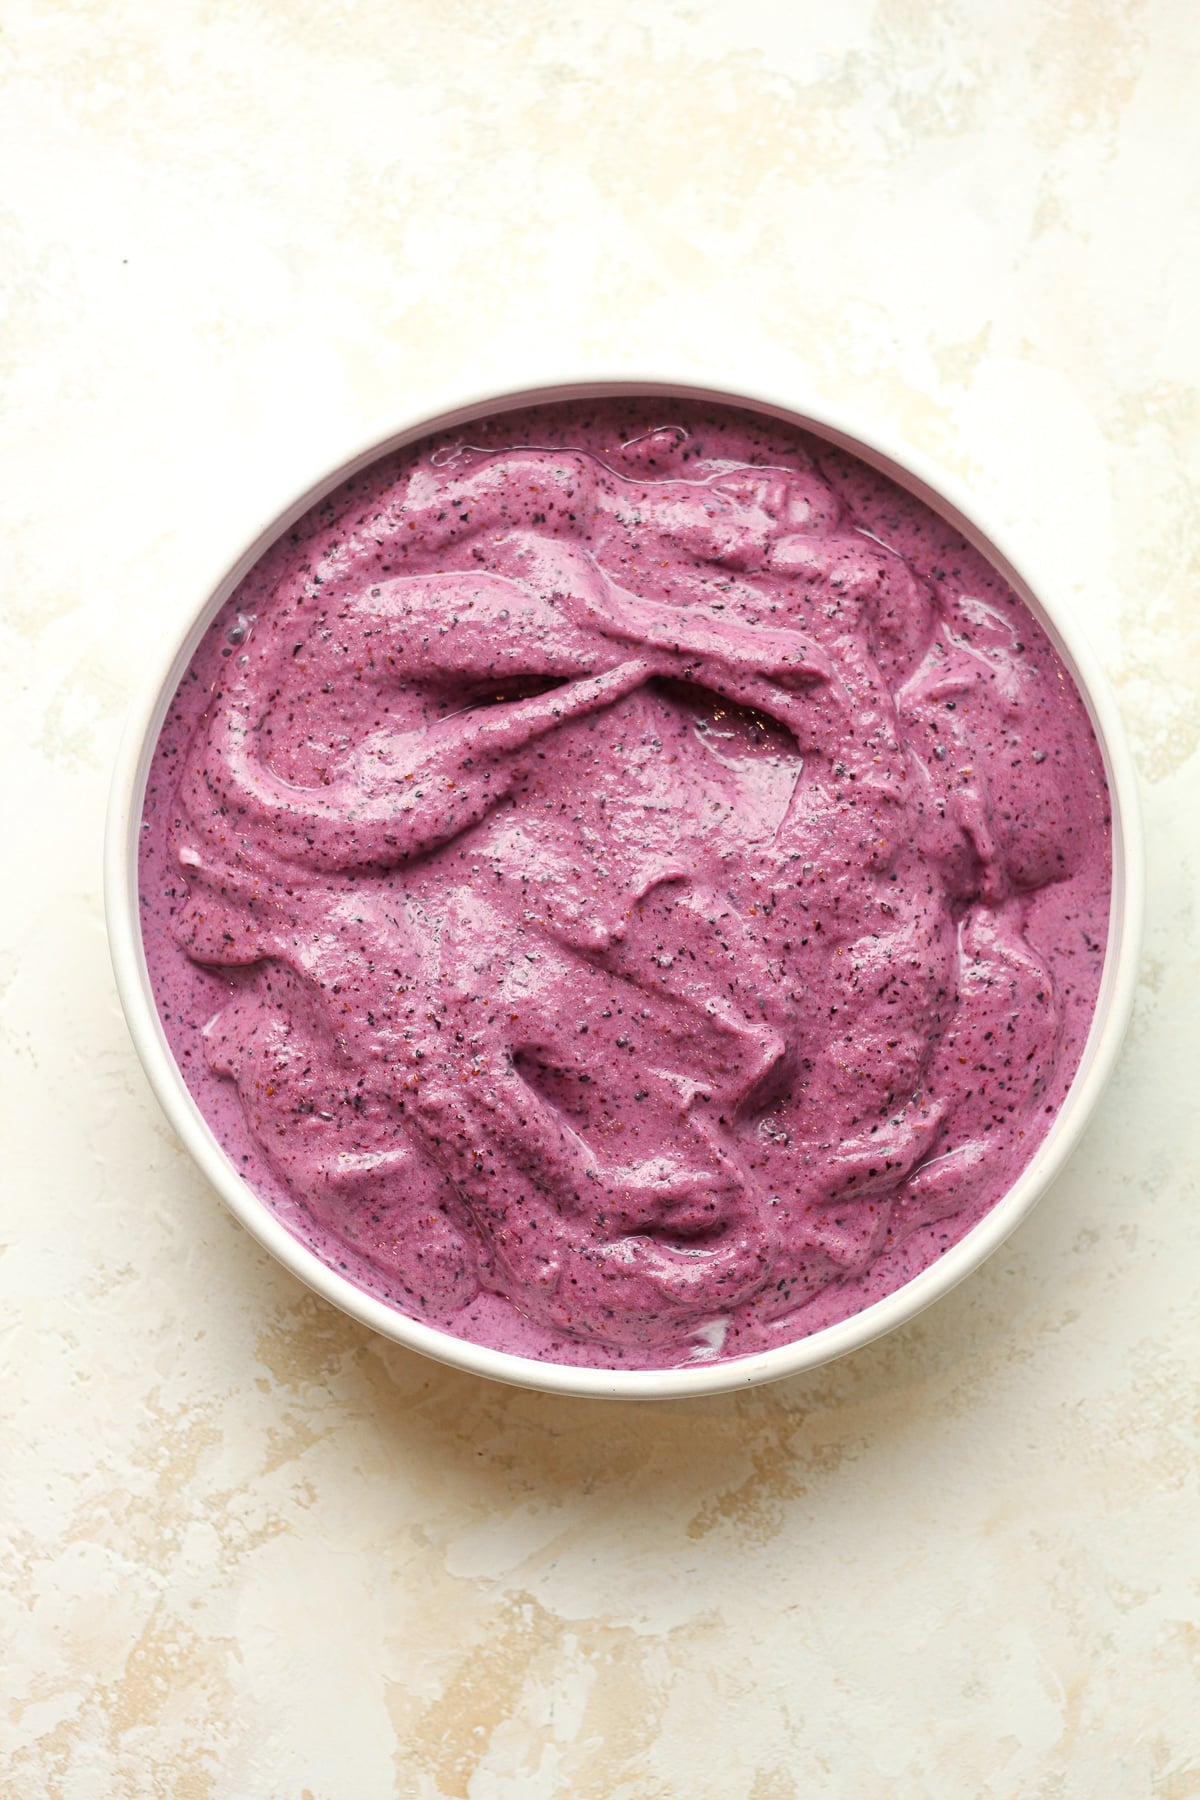 A bowl with the blueberry puree before toppings.